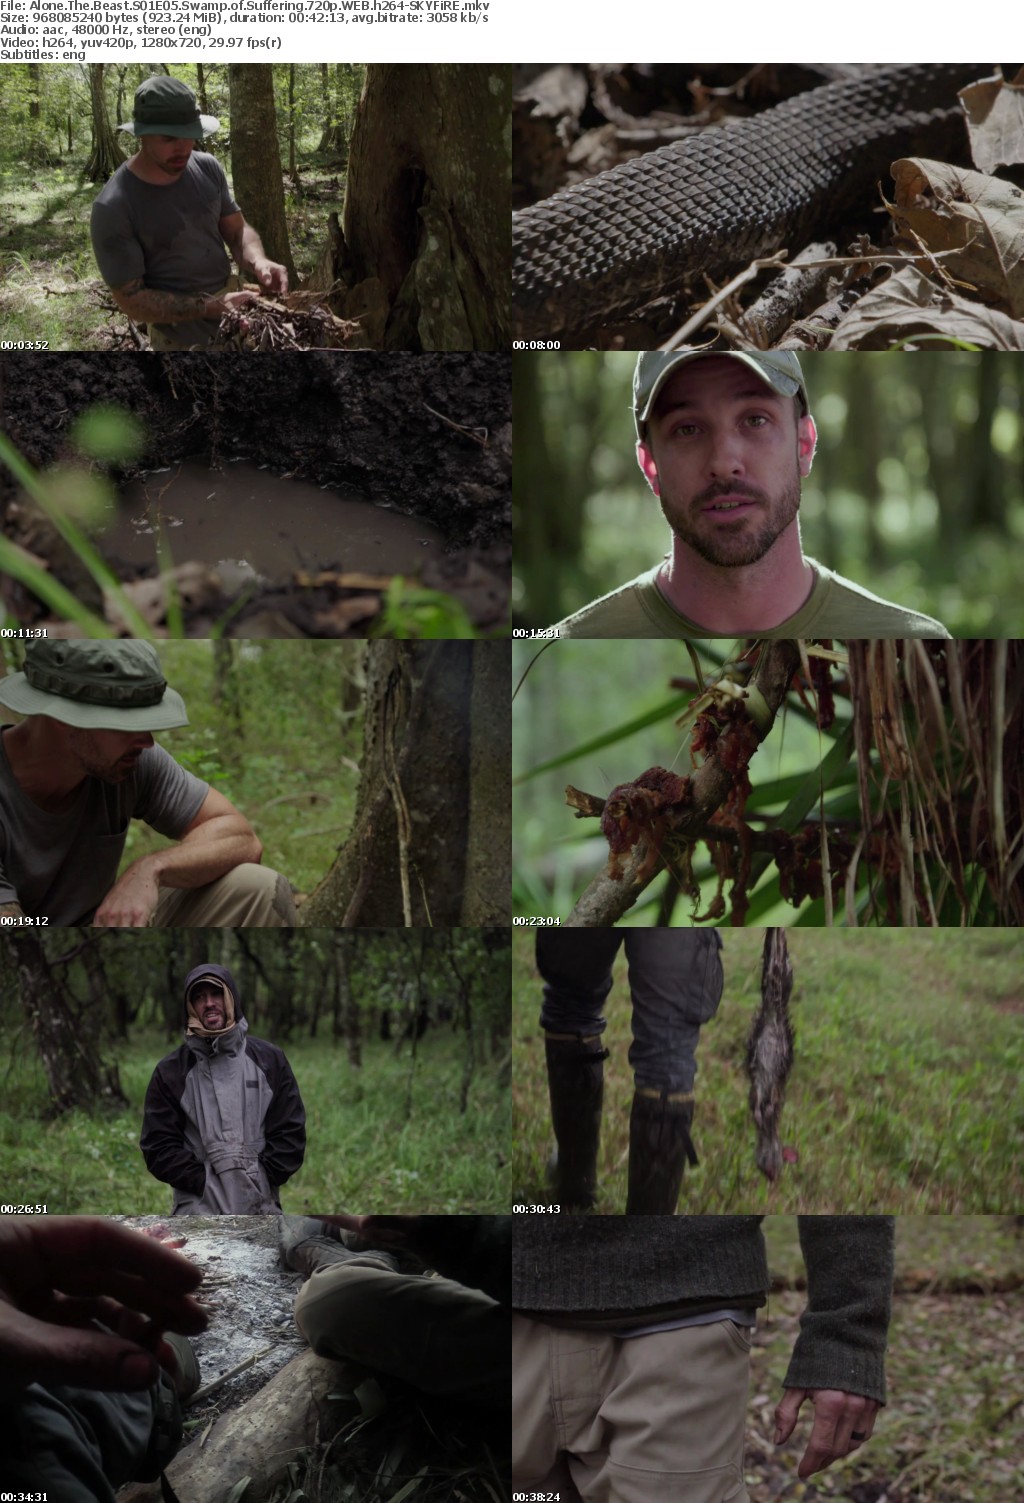 Alone The Beast S01E05 Swamp of Suffering 720p WEB h264-SKYFiRE